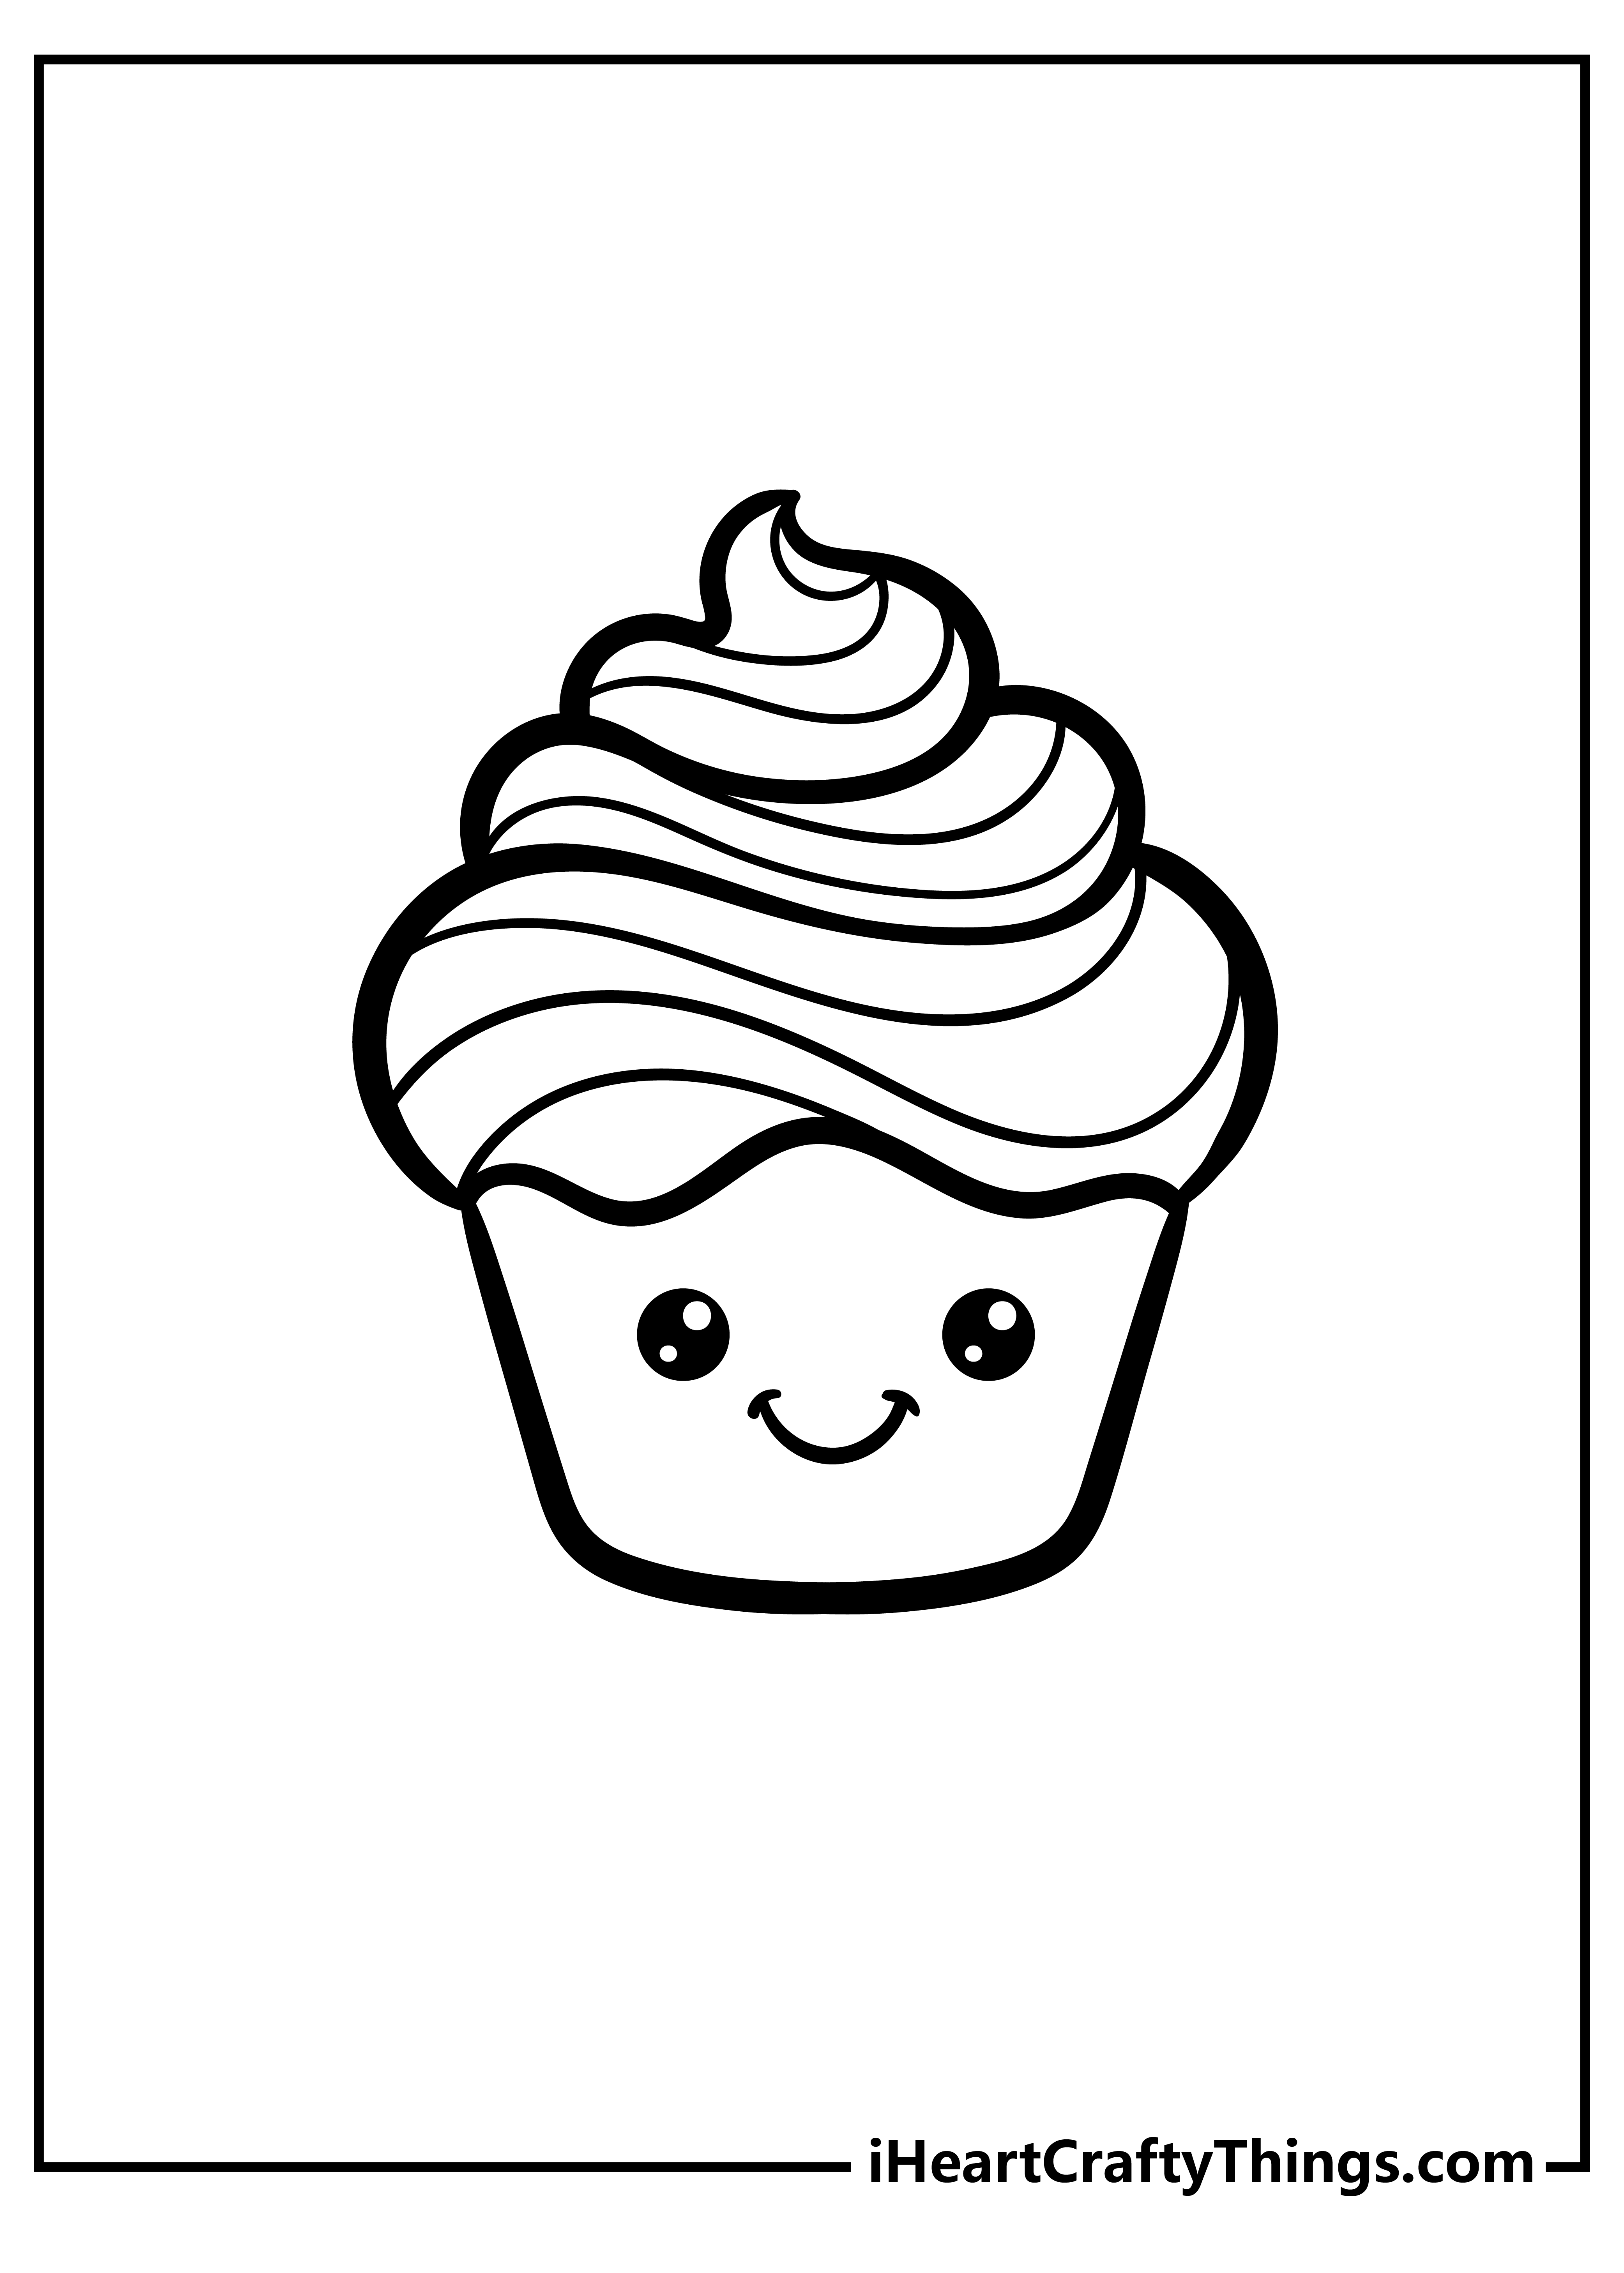 Printable Cute Food Coloring Pages Updated 14